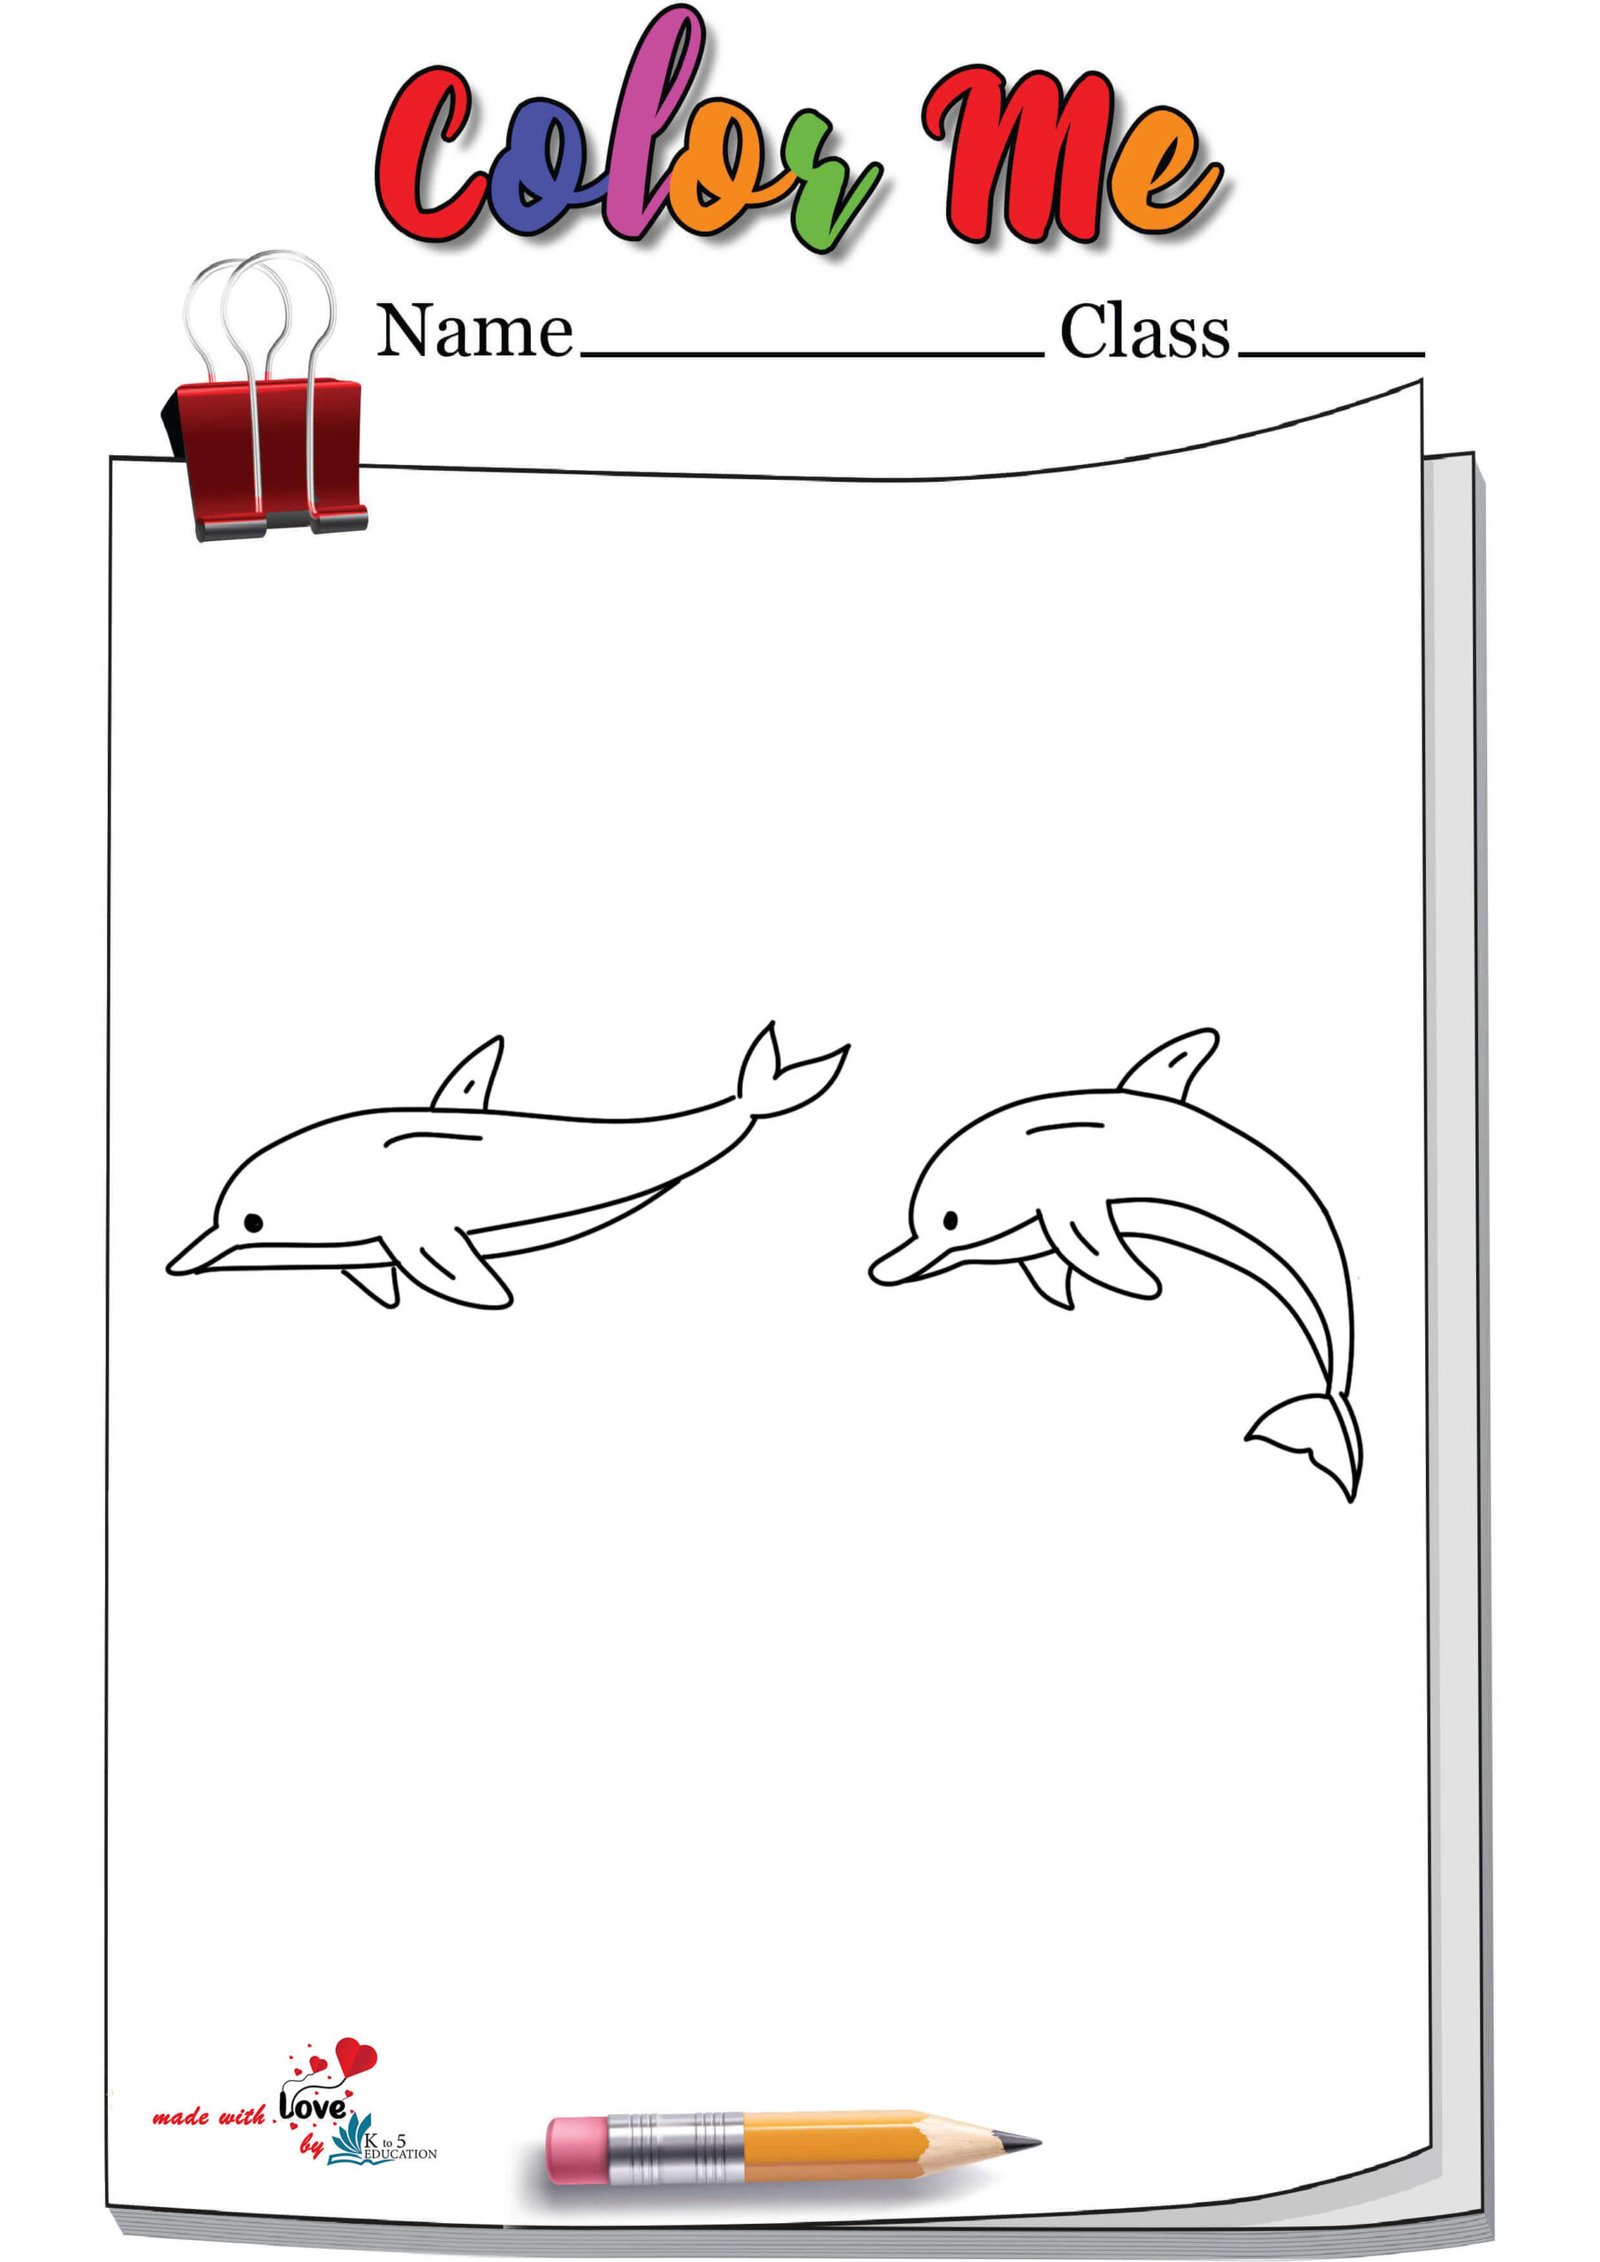 Dolphins Playing Together Coloring Page